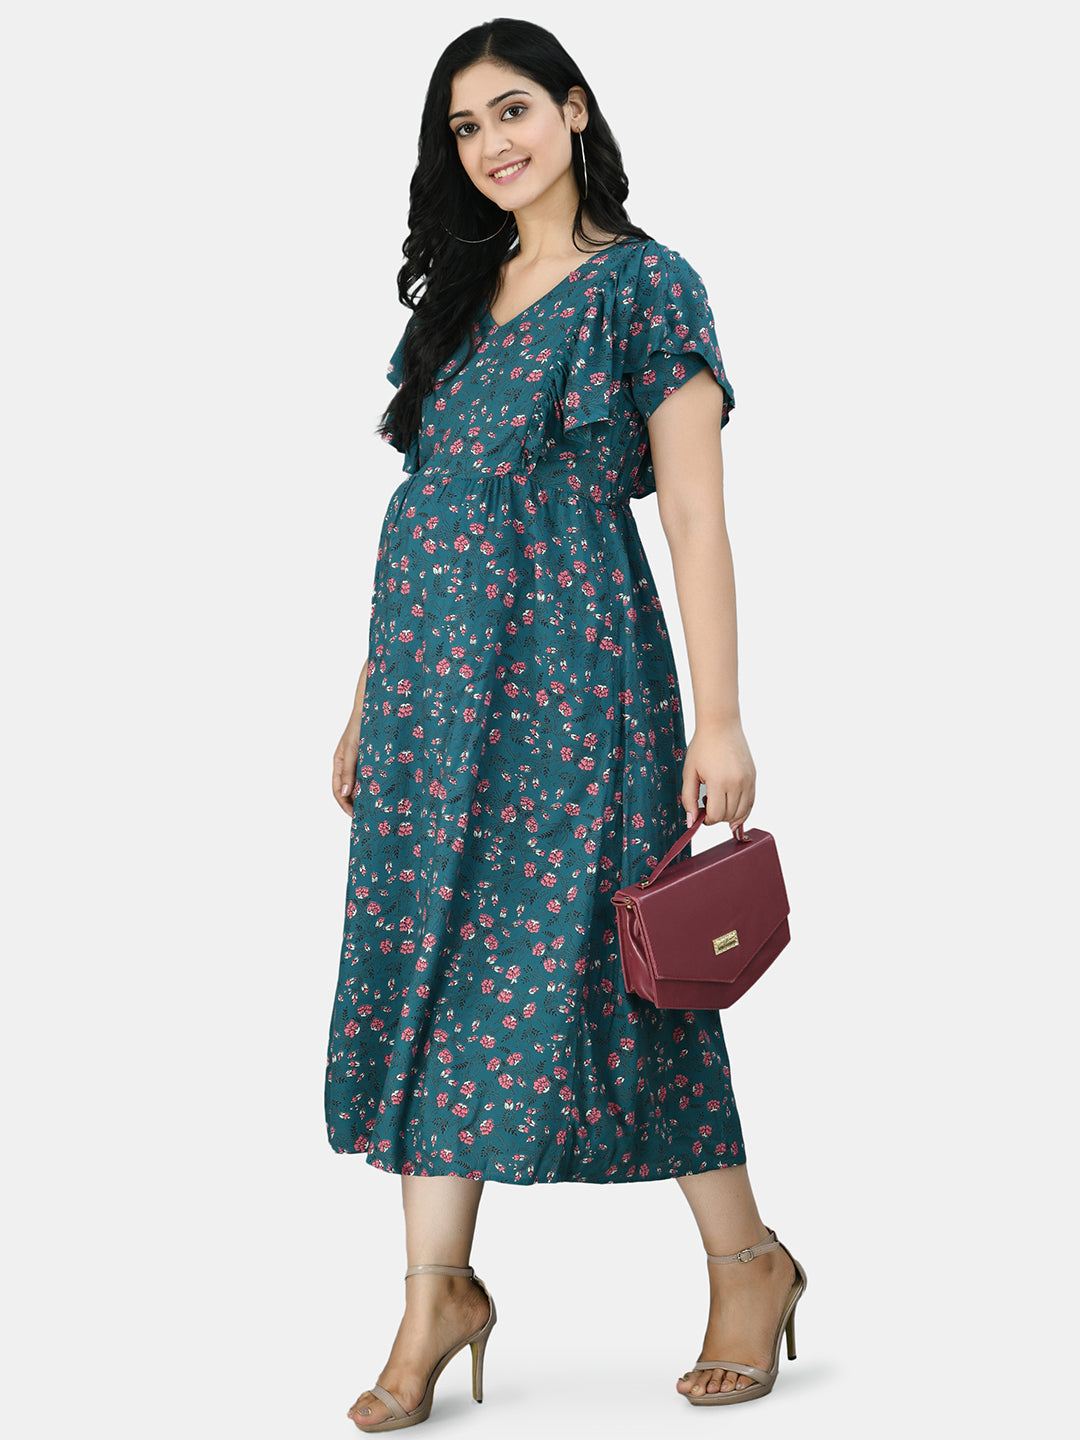 Maternity Clothing - Buy Women Maternity Clothing at Great Discount | Myntra